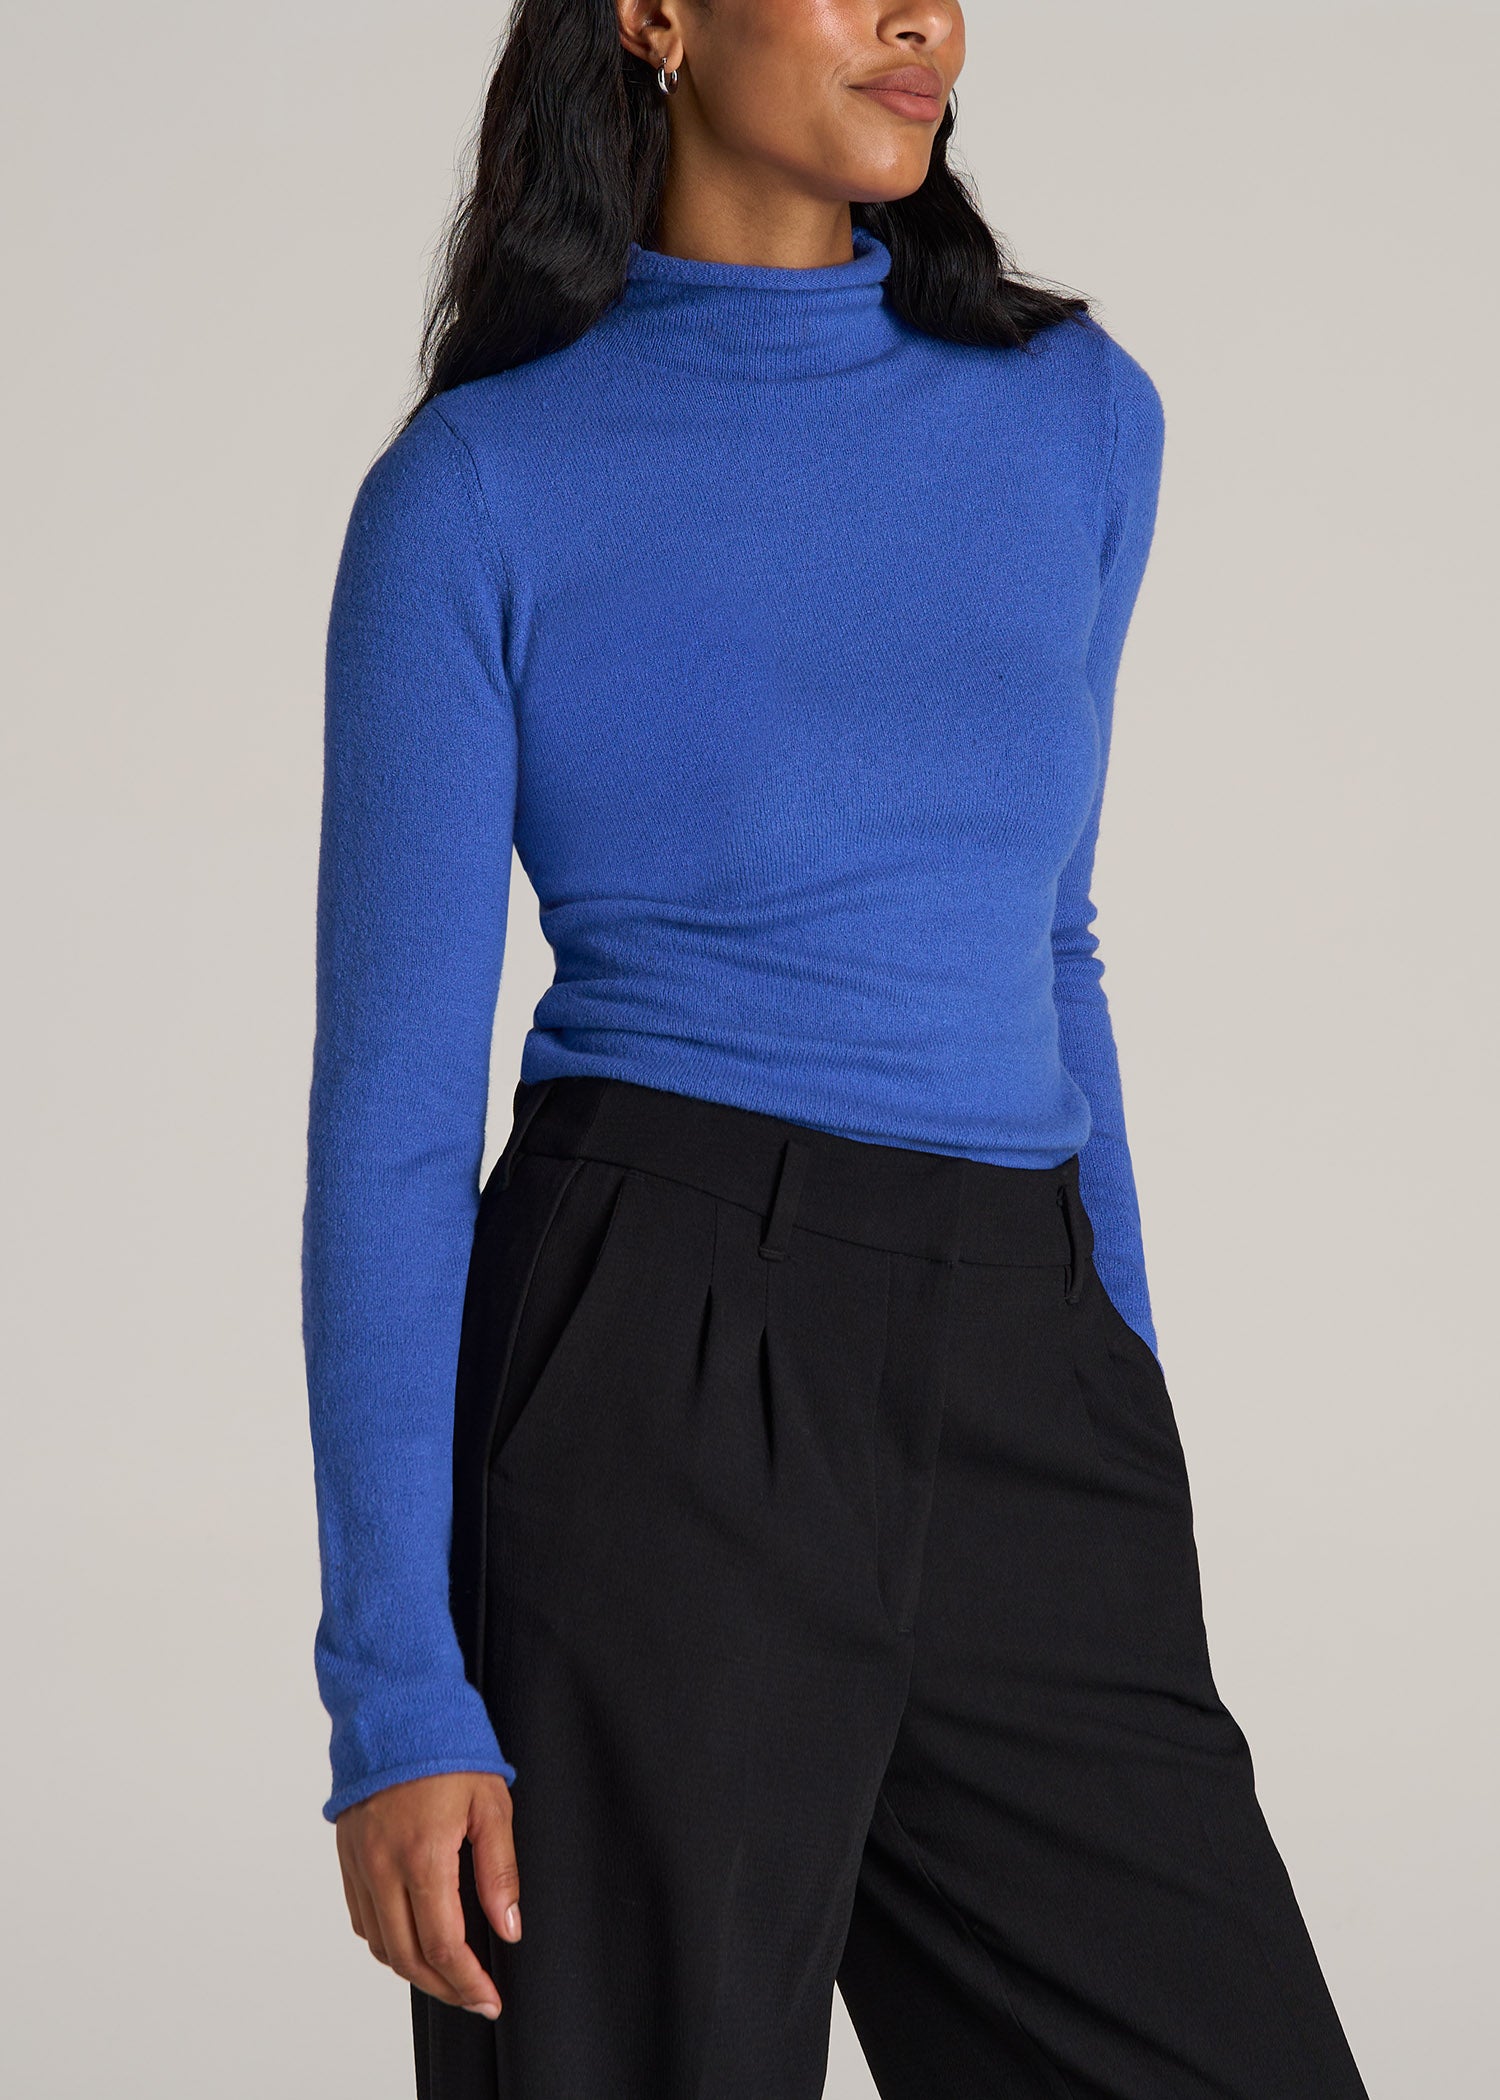 Tall woman wearing American Tall's Women's Tall Rolled Mock Neck Sweater in Light Cobalt.